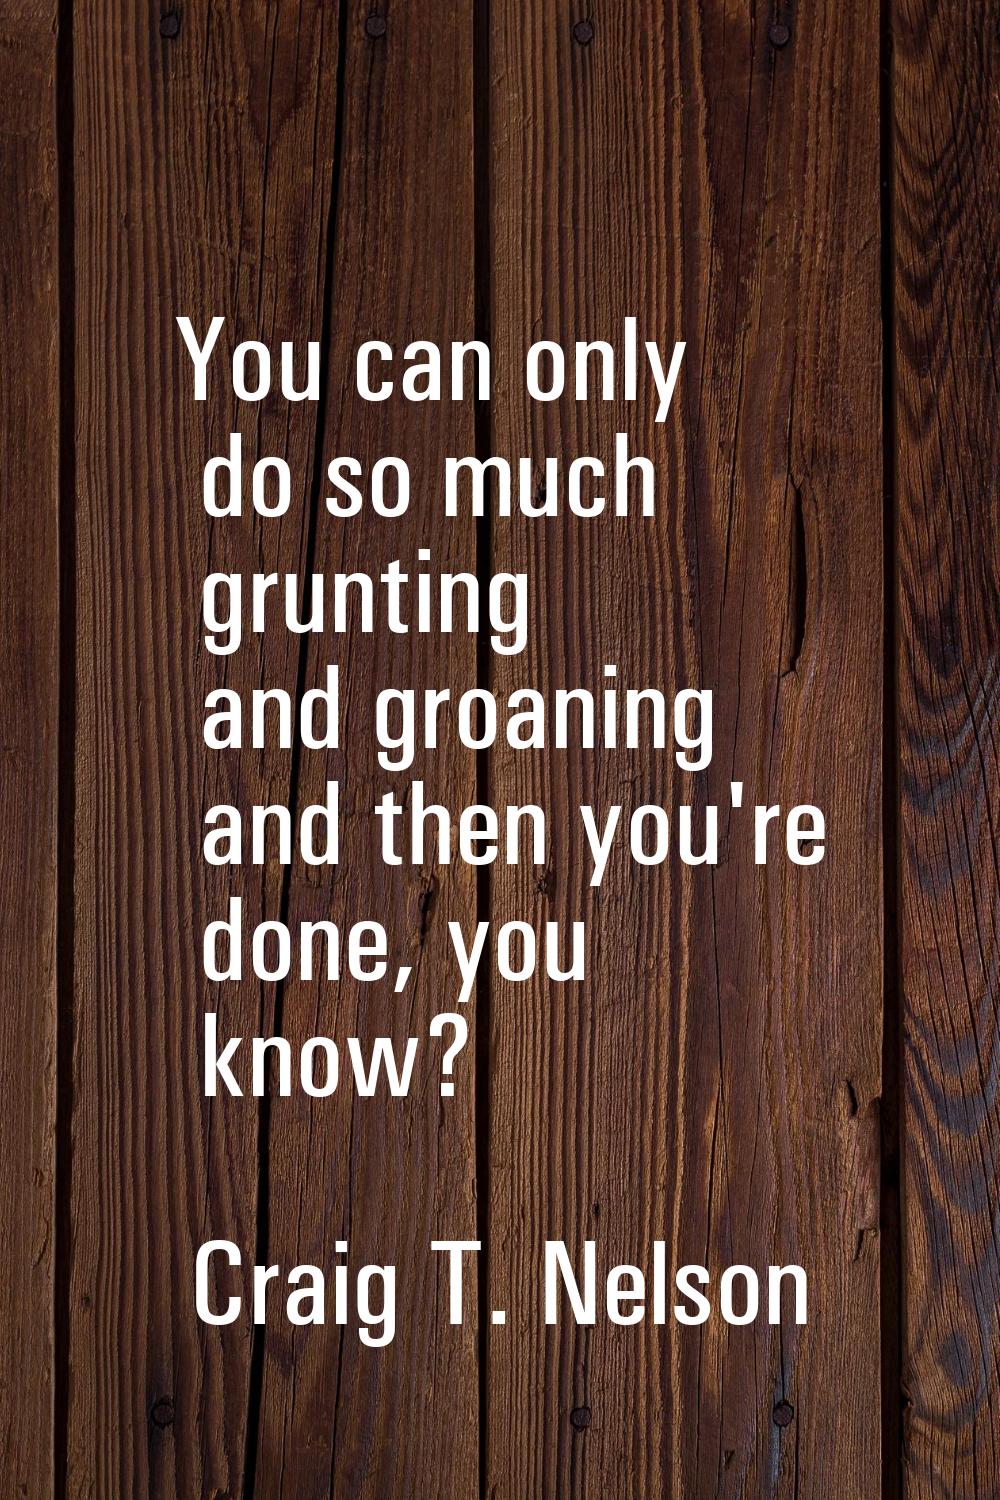 You can only do so much grunting and groaning and then you're done, you know?